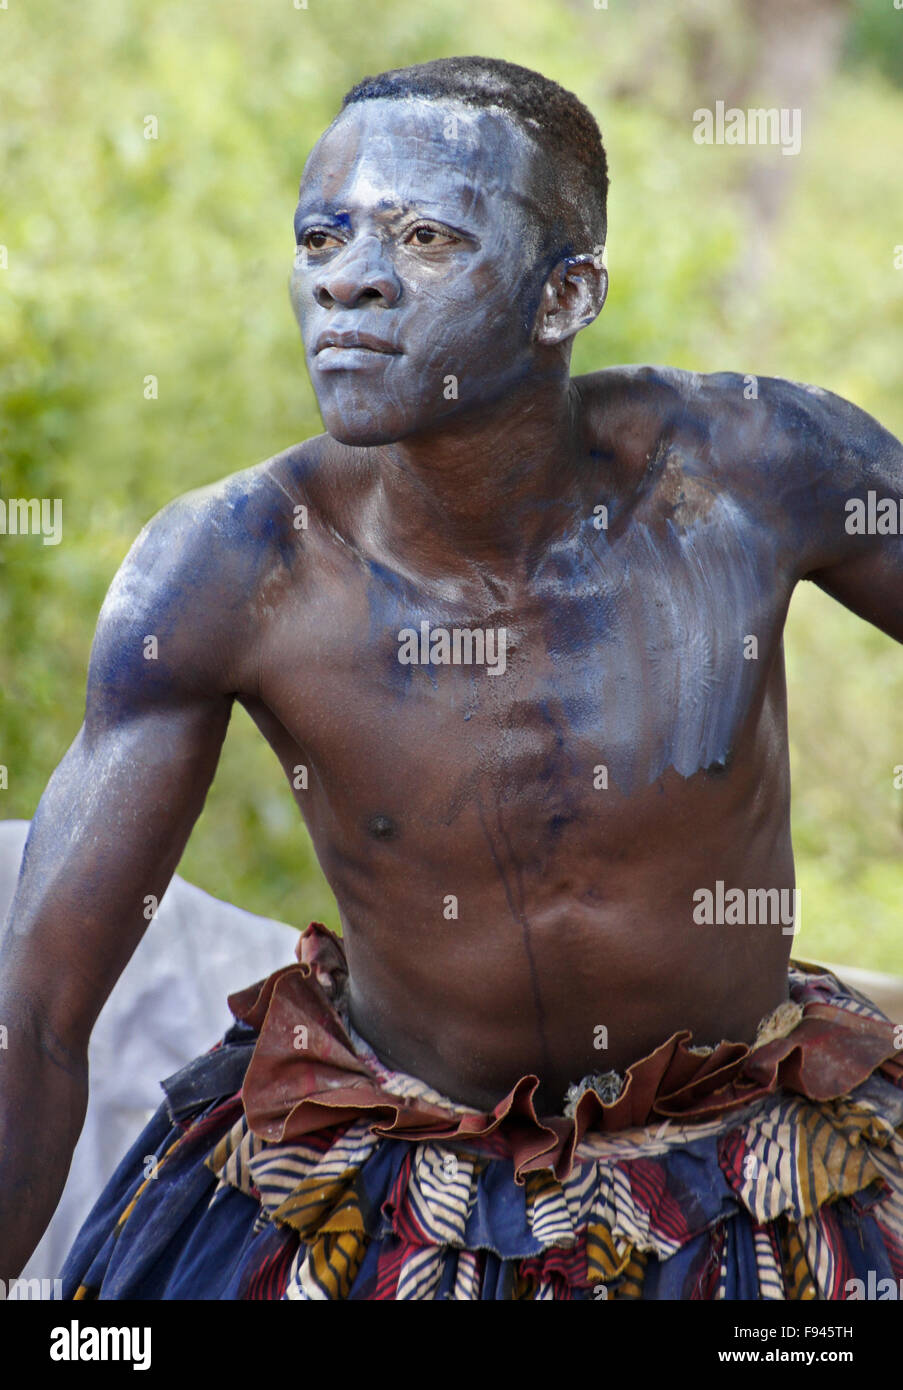 Vodun (voodoo) ceremony for Gambada divinity, where this man is possessed by a spirit, village near Abomey, Benin Stock Photo